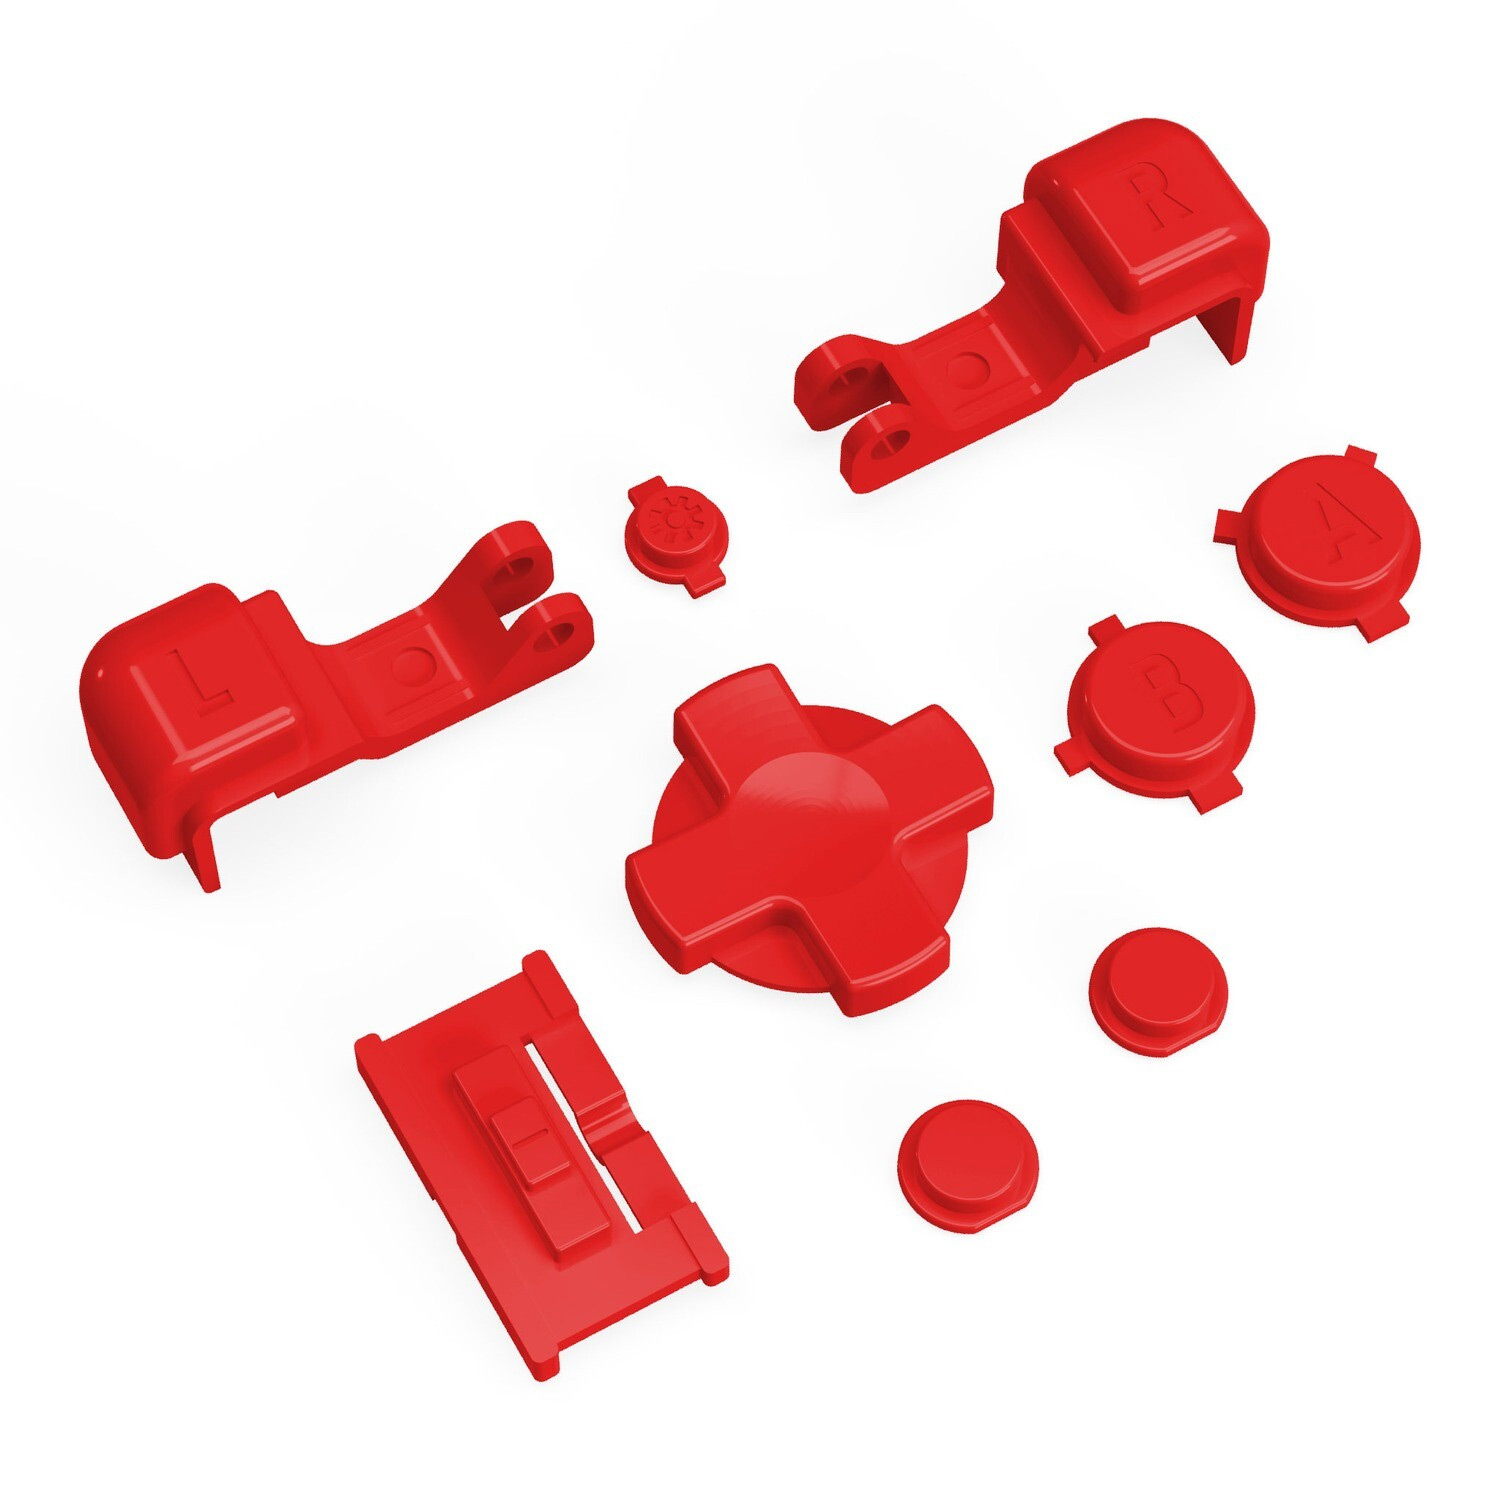 Game Boy Advance SP Buttons (Solid Red)